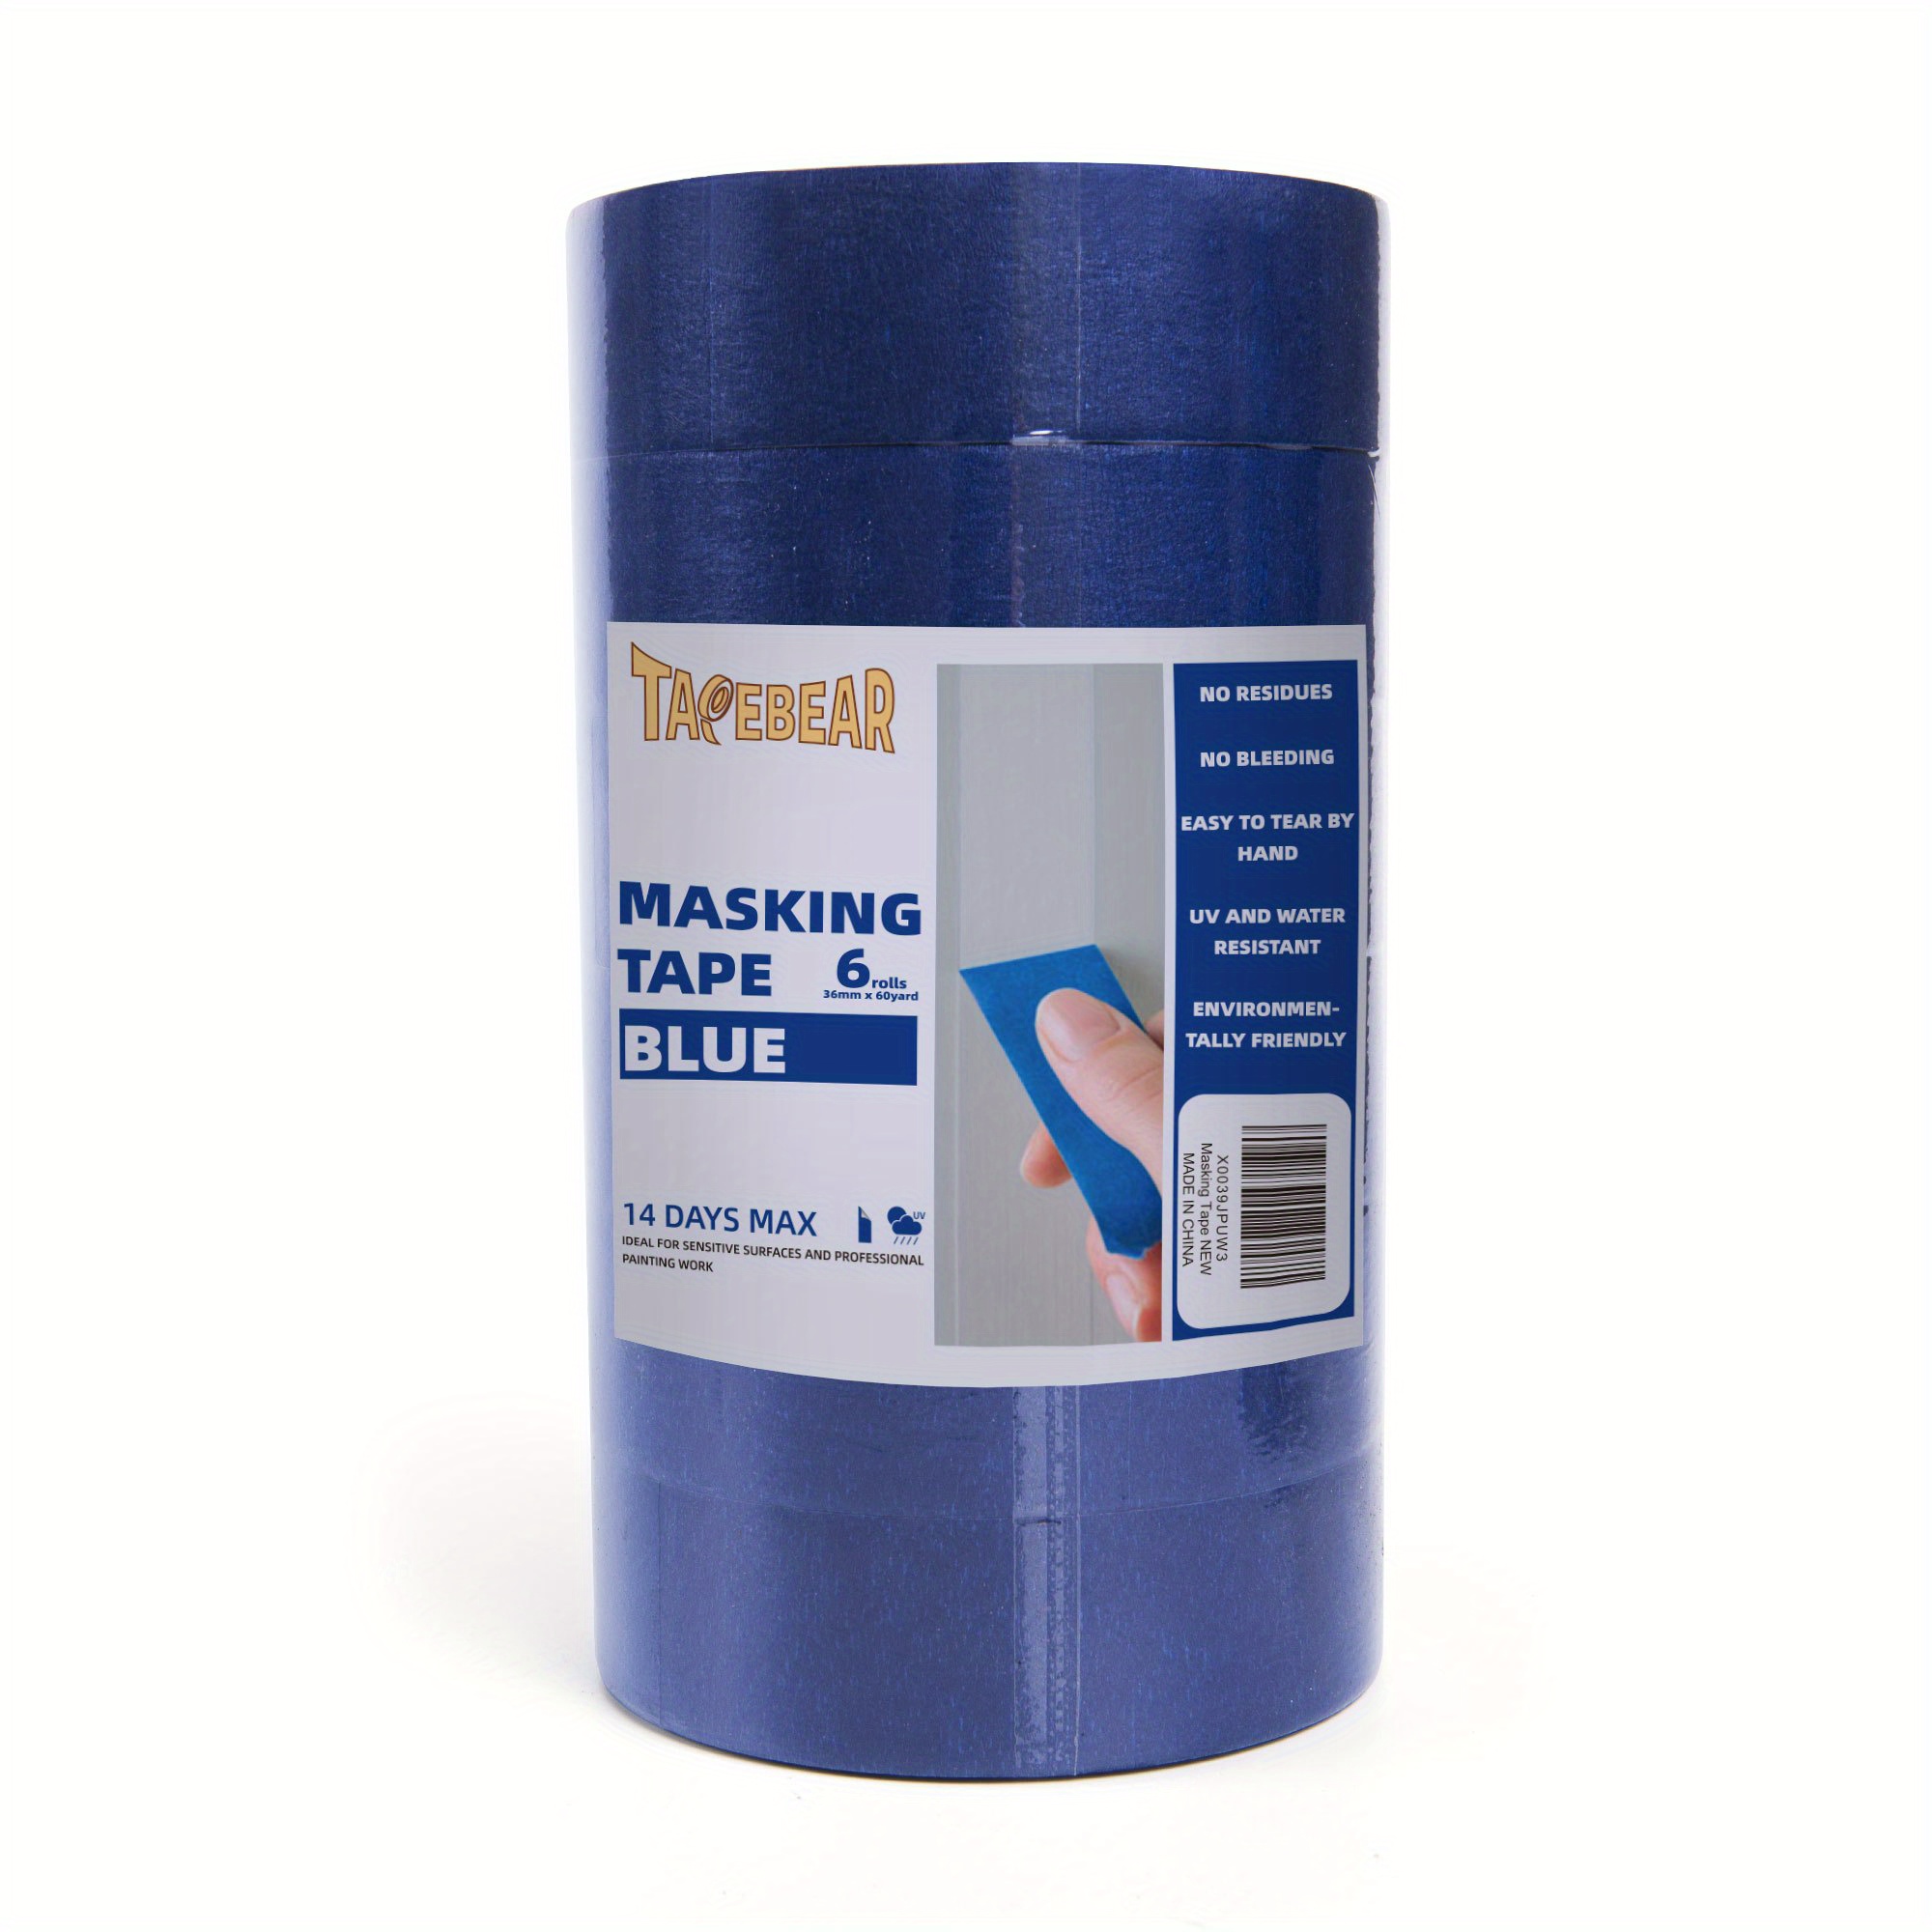 Painters Tape Masking 3D Print Blue 1 roll of 12 x 60 yards